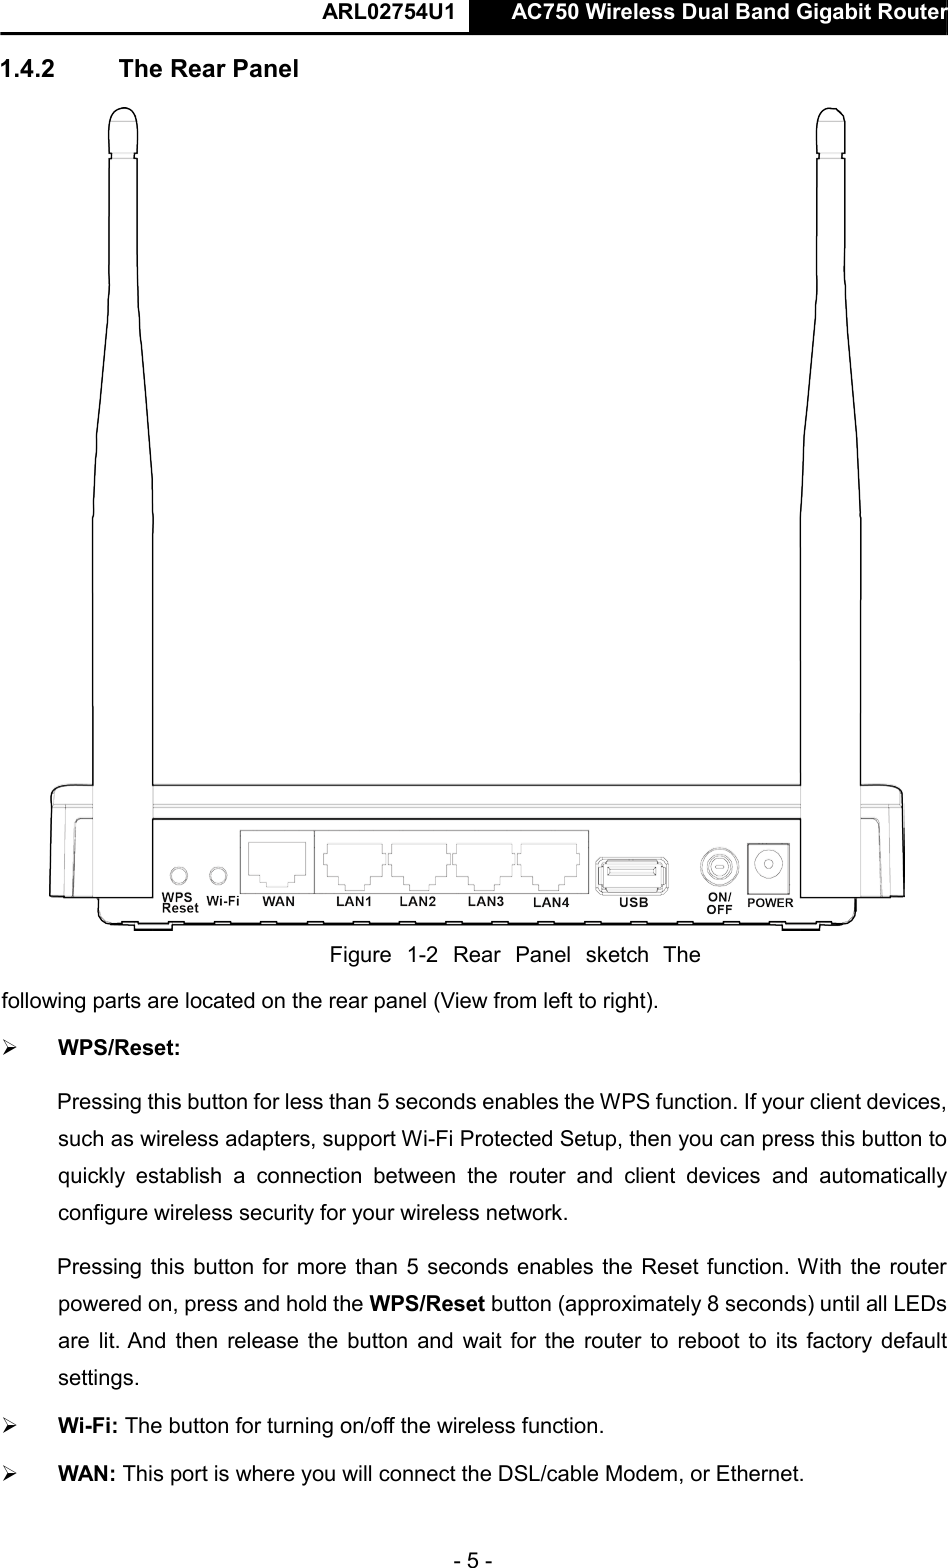  ARL02754U1  AC750 Wireless Dual Band Gigabit Router    - 5 -  1.4.2  The Rear Panel    Figure  1-2  Rear  Panel  sketch  The following parts are located on the rear panel (View from left to right).   WPS/Reset:   Pressing this button for less than 5 seconds enables the WPS function. If your client devices, such as wireless adapters, support Wi-Fi Protected Setup, then you can press this button to quickly  establish  a  connection  between  the  router  and  client  devices  and  automatically configure wireless security for your wireless network.   Pressing this button for more than 5 seconds enables the Reset function. With the router powered on, press and hold the WPS/Reset button (approximately 8 seconds) until all LEDs are lit. And  then release the button and wait for the router to reboot to its factory default settings.   Wi-Fi: The button for turning on/off the wireless function.   WAN: This port is where you will connect the DSL/cable Modem, or Ethernet.  